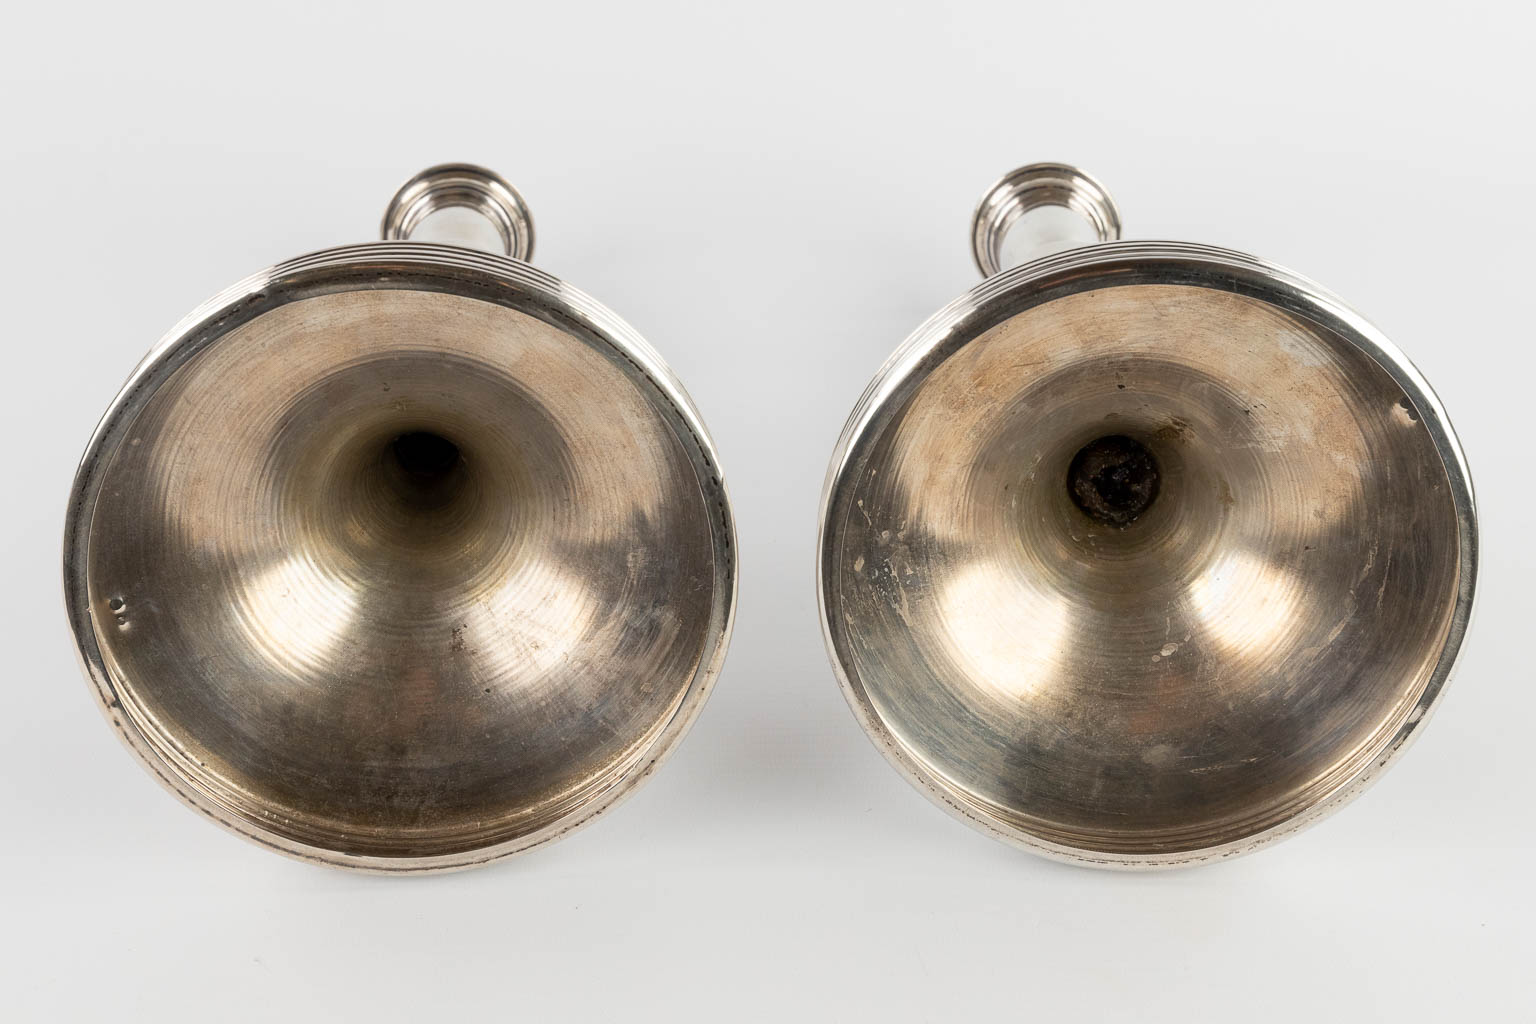 A pair of candle holders, silver, 800/1000, marked Vienna, Austria. 1872-1922. 1152g. (W:16,5 x H:34 cm)